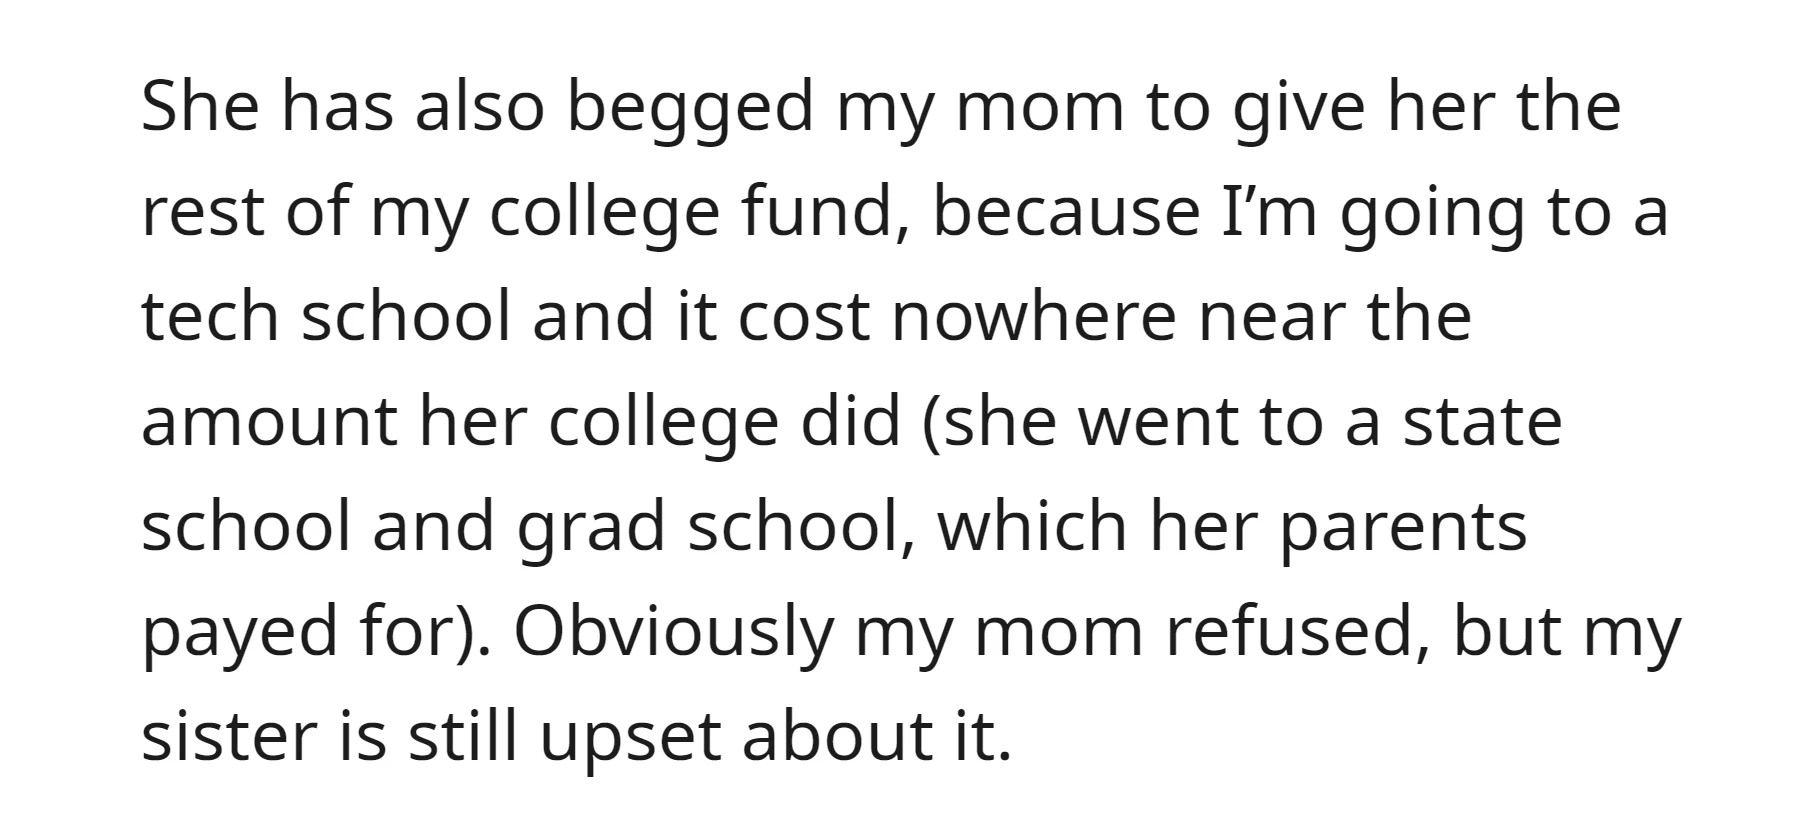 The OP's sister has asked their mom for the remainder of OP's college fund, but she got upset as their mom declined